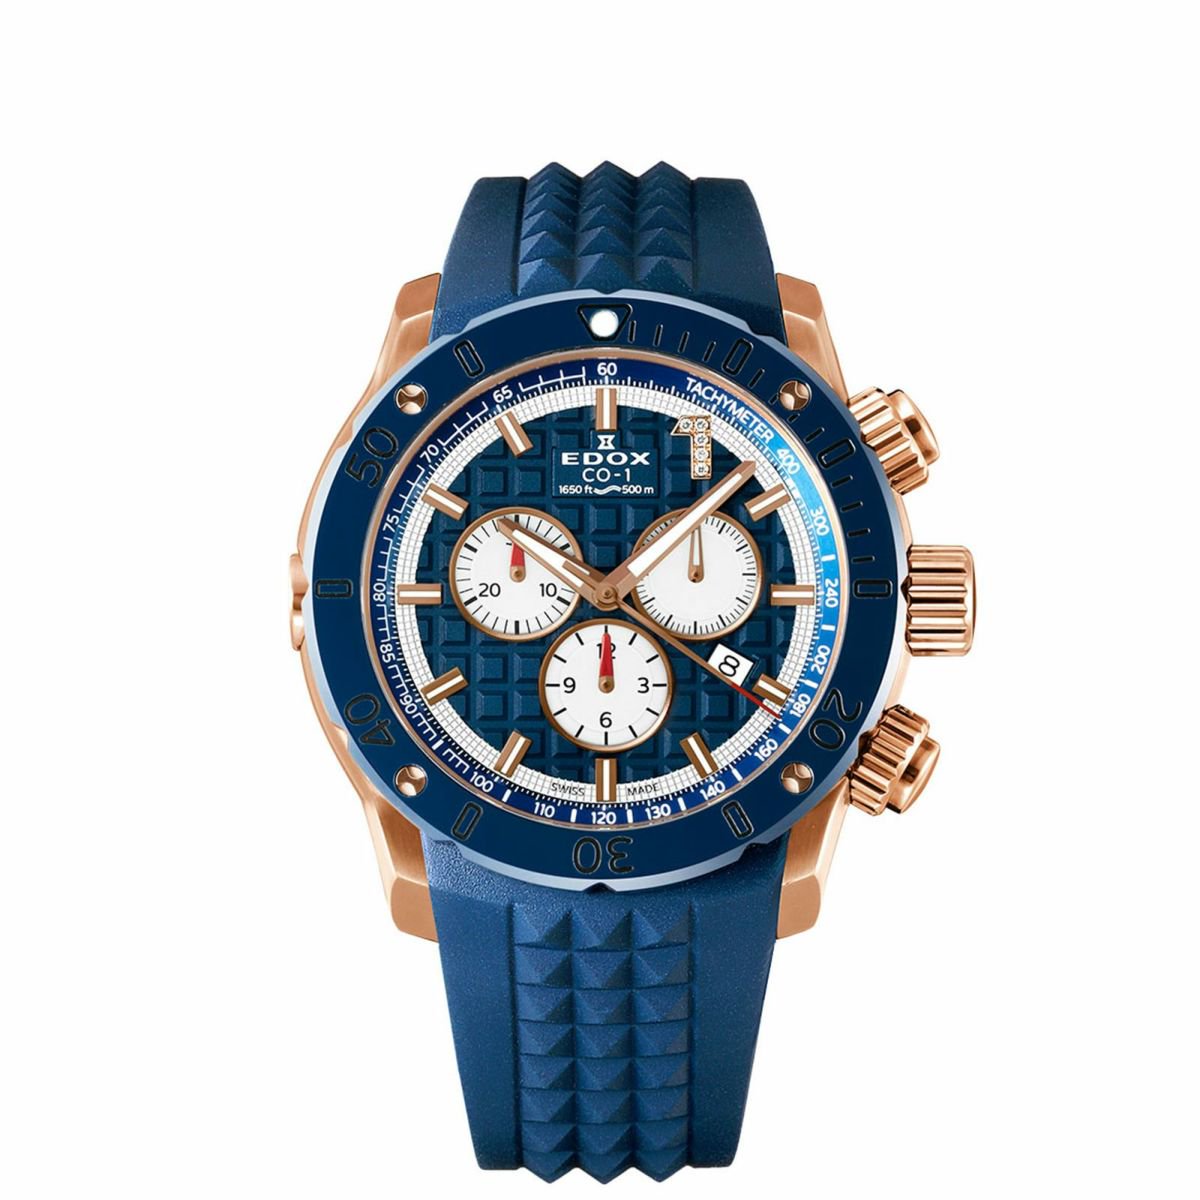 CHRONOFFSHORE-1 CHRONOGRAPH
LIMITED EDITION